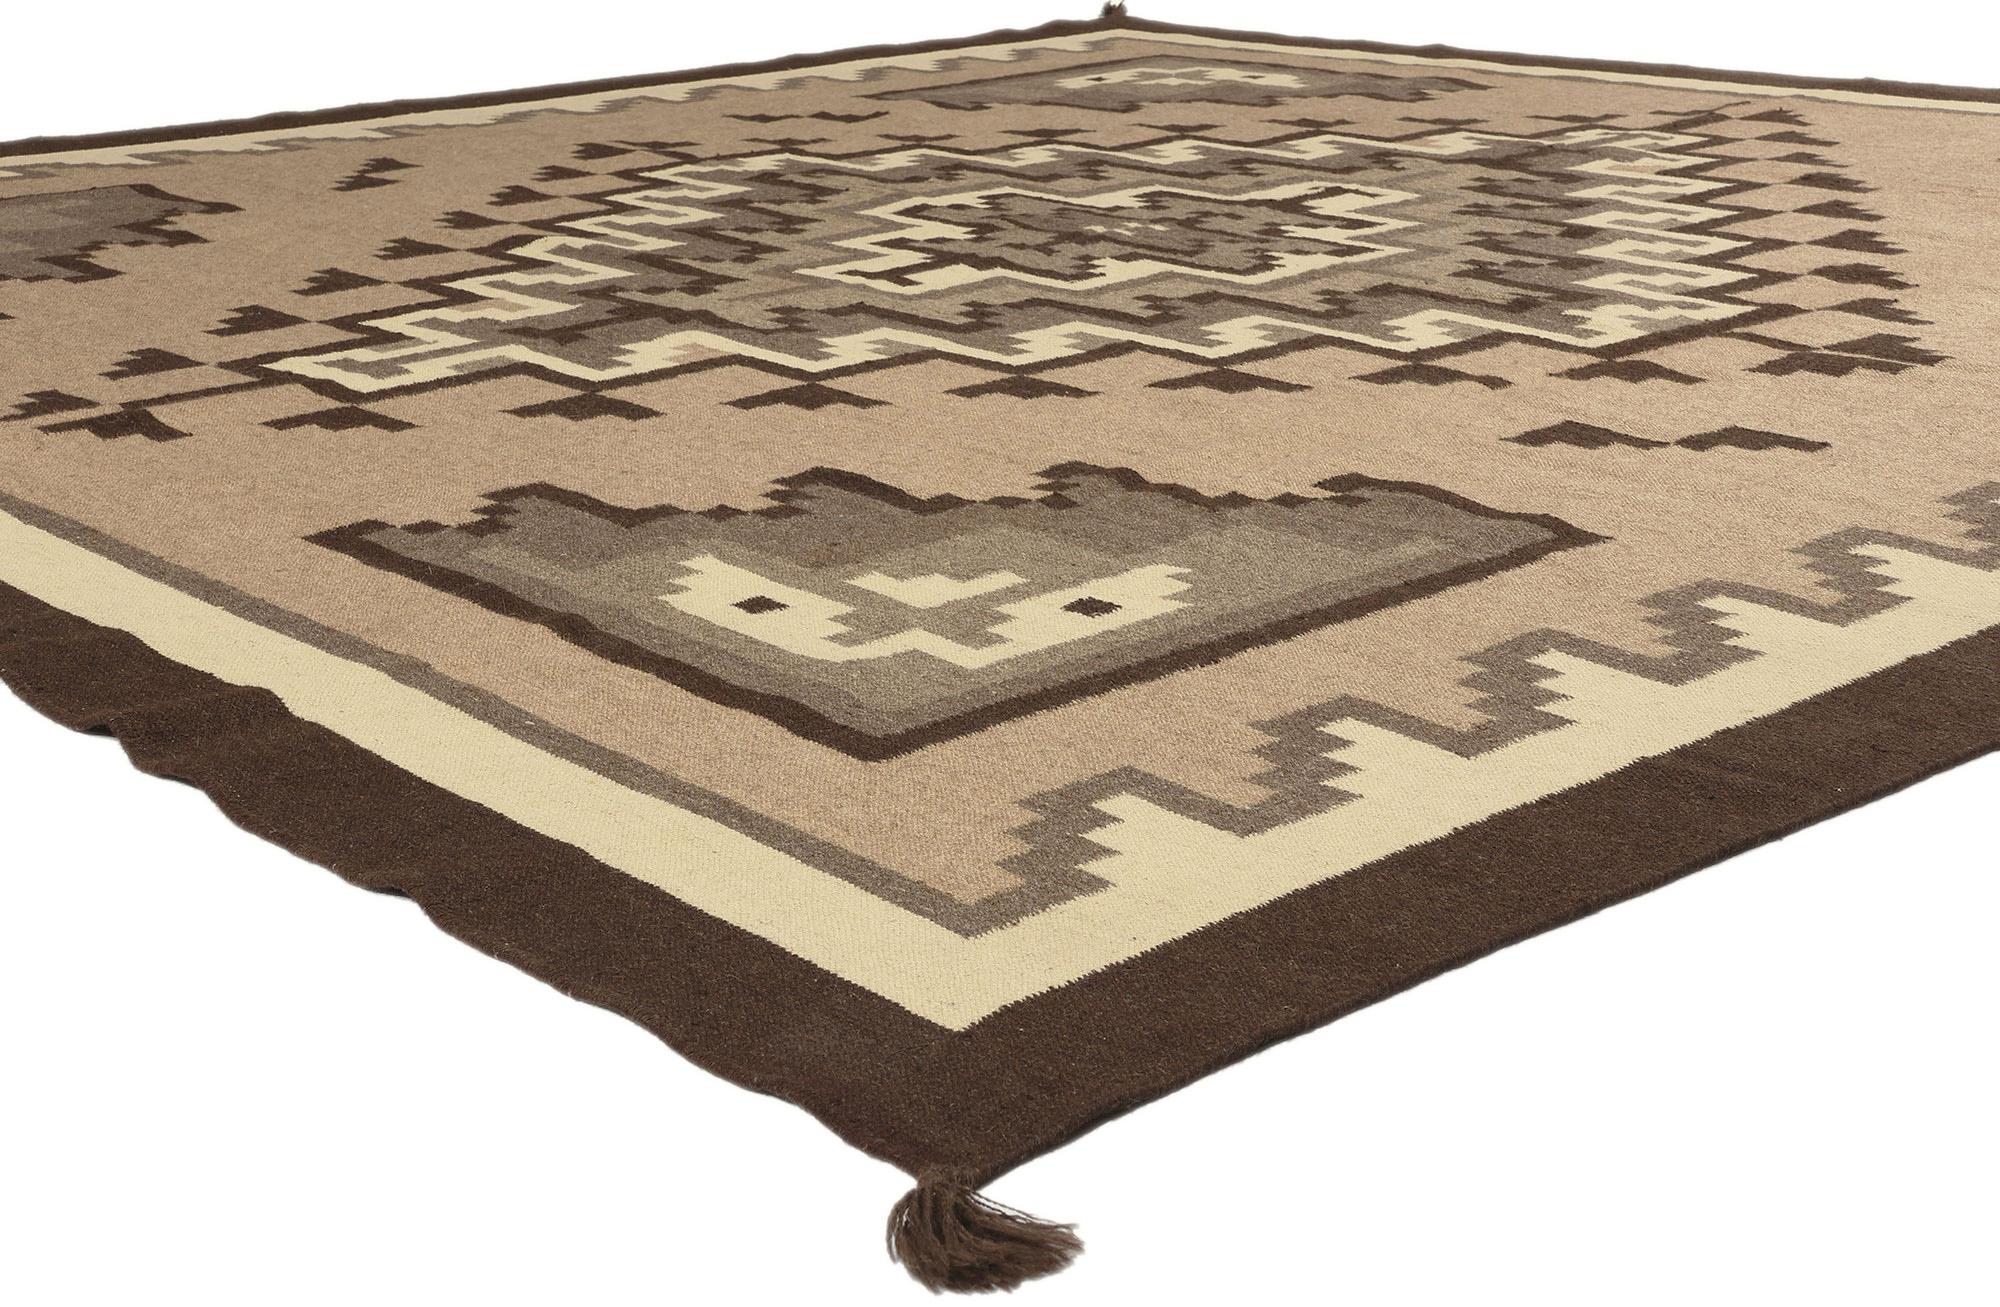 81039 Southwest Modern Two Grey Hills Navajo-Style Rug, 10'01 x 10'00. Experience the seamless fusion of Organic Modern and understated Southwest elegance in this meticulously handwoven Two Grey Hills Navajo-style rug. The captivating